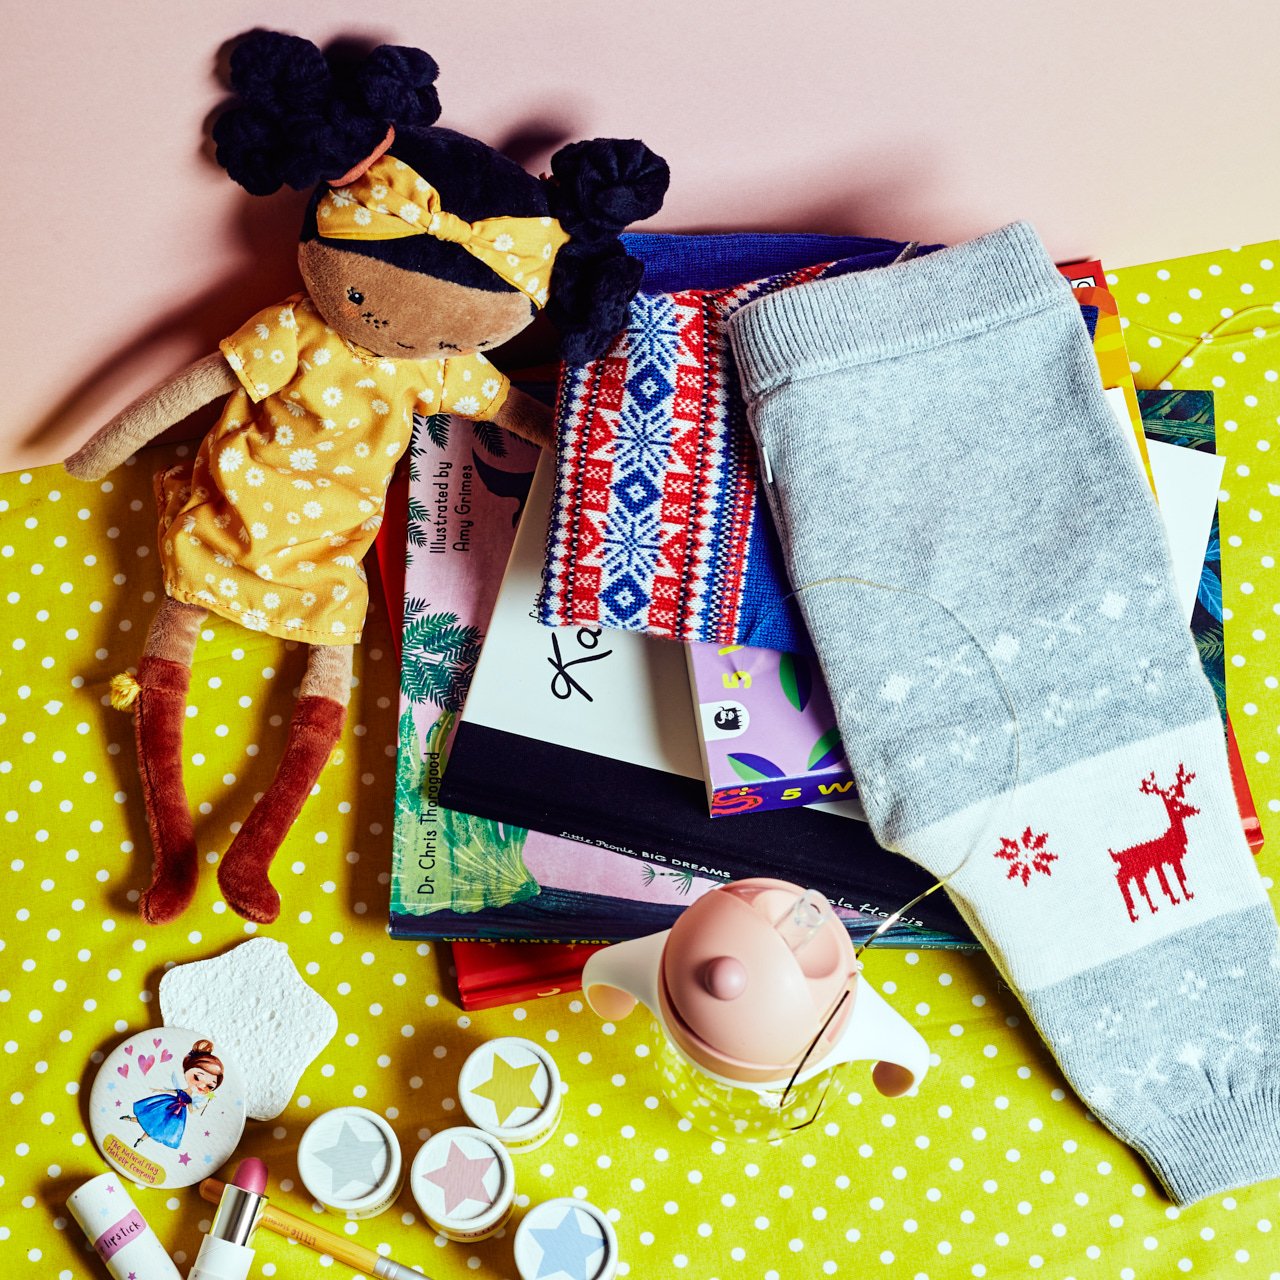  LITTLE DUTCH  Cuddly Doll Evi  £13.95 @ Scandiborn&nbsp;  RACHEL RILEY  Fairisle Sweater  £59  BABY MORI  Knitted Reindeer Joggers  £29.50  BEABA  Straw Cup  £10  THE NATURAL PLAY MAKEUP COMPANY  Little Stardust Pressed Powder Natural Play Makeup Ki